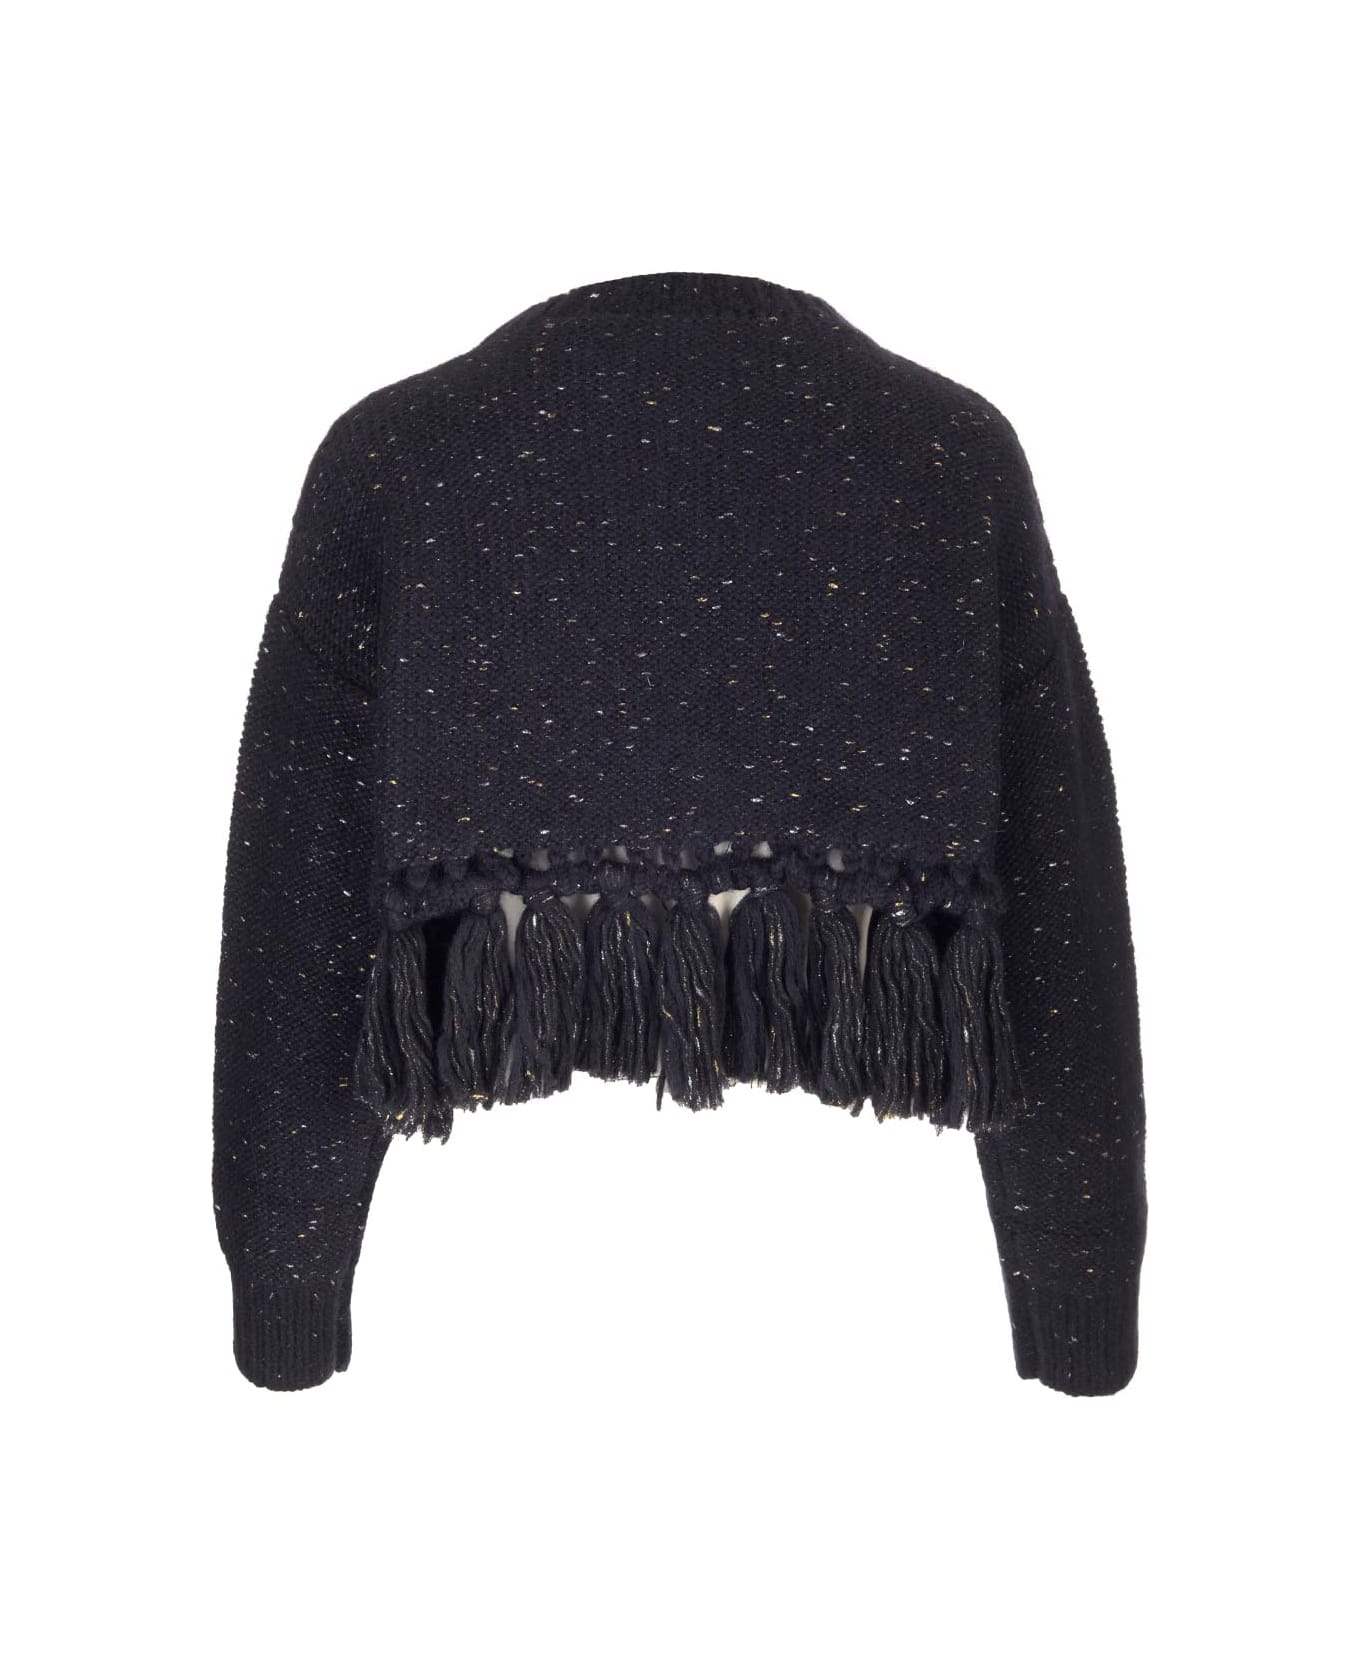 Alanui 'astrale' Crop Sweater With Fringes - Blue